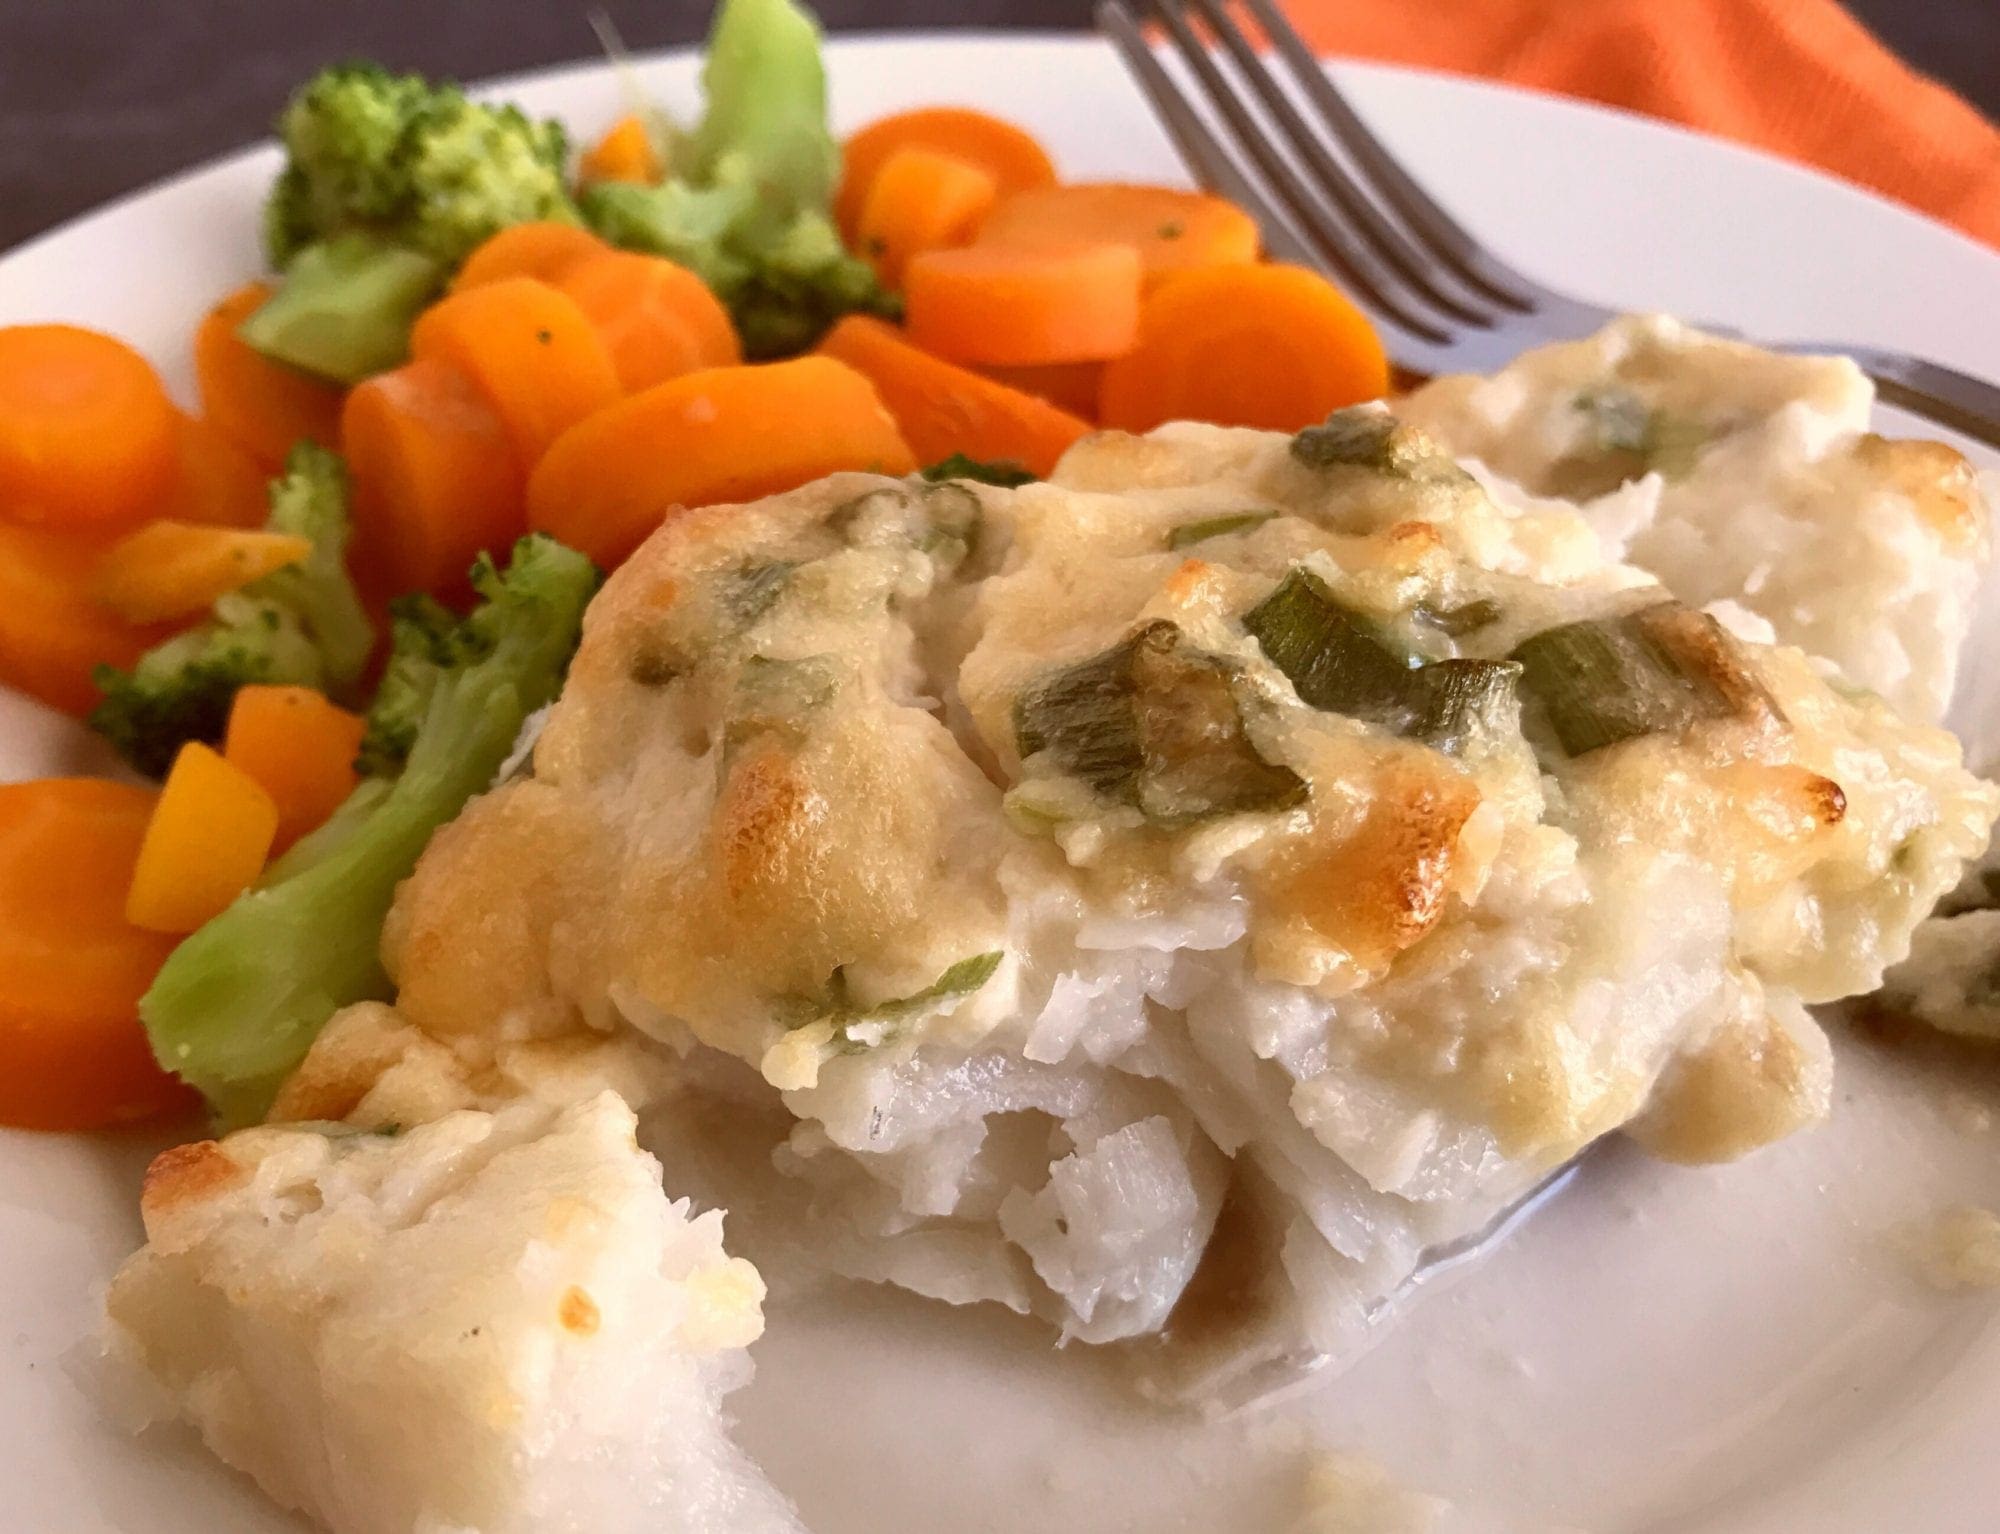 Baked Cod with Creamy Parmesan Mayo spread